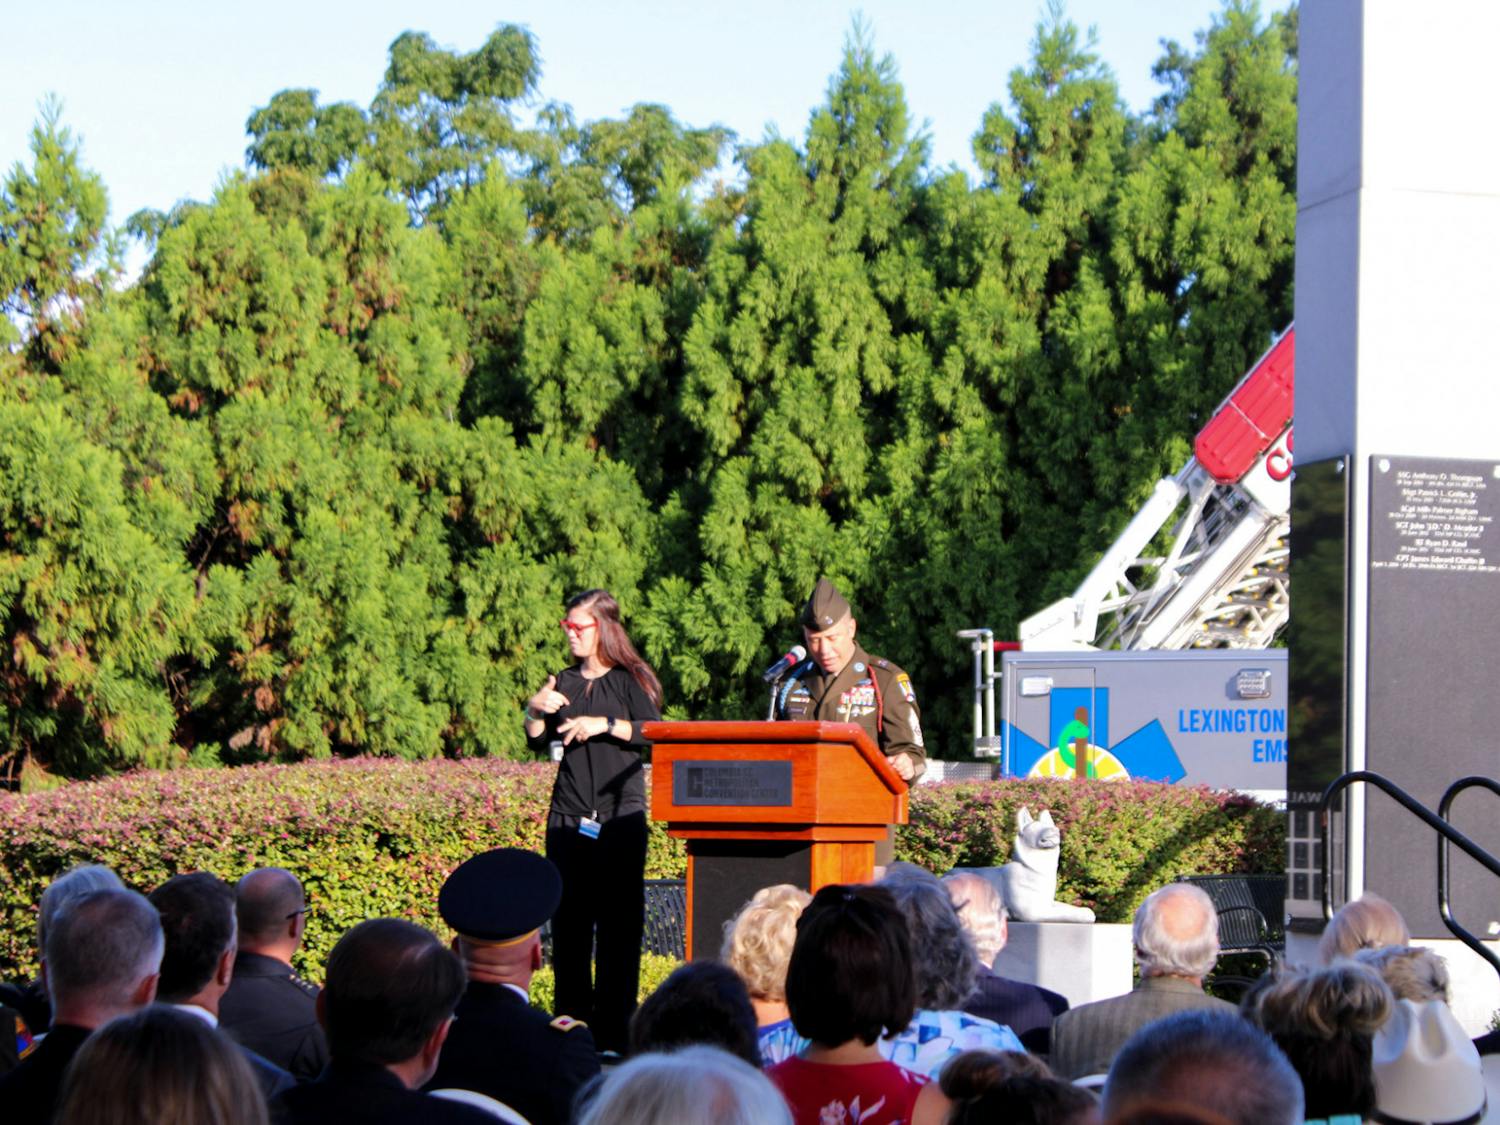 A U.S veteran speaks at the remembrance ceremony on the 21st anniversary of 9/11 on Sept. 11, 2022, at the Columbia Metropolitan Convention Center. The 9/11 Remembrance Foundation of South Carolina invited guests and veterans to speak in memoriam of the lives lost in relation to the tragedy.